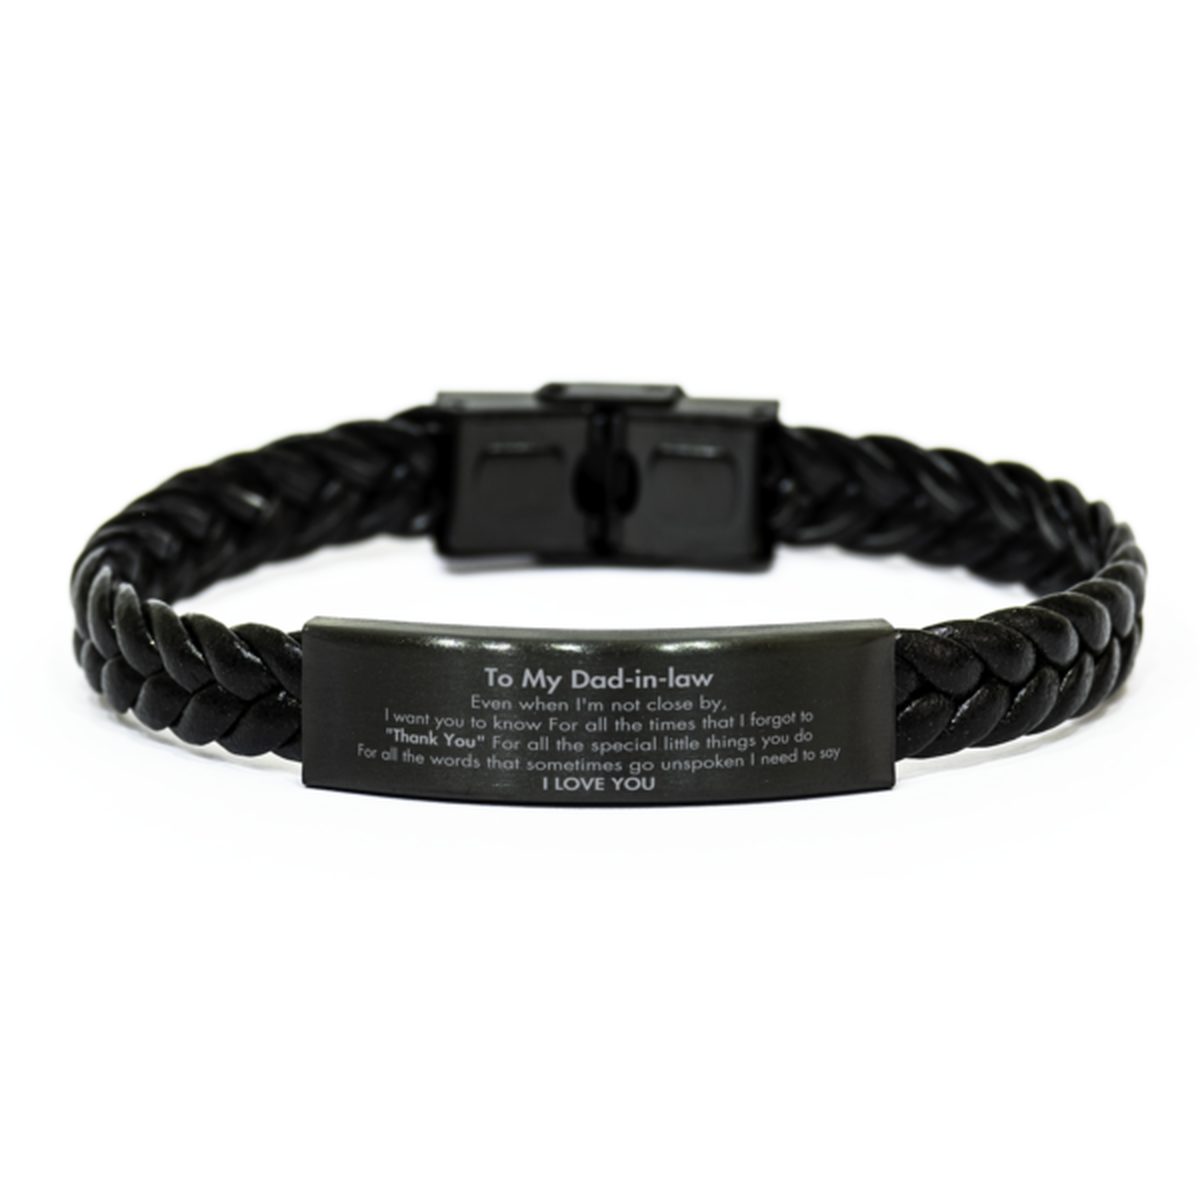 Thank You Gifts for Dad-in-law, Keepsake Braided Leather Bracelet Gifts for Dad-in-law Birthday Mother's day Father's Day Dad-in-law For all the words That sometimes go unspoken I need to say I LOVE YOU